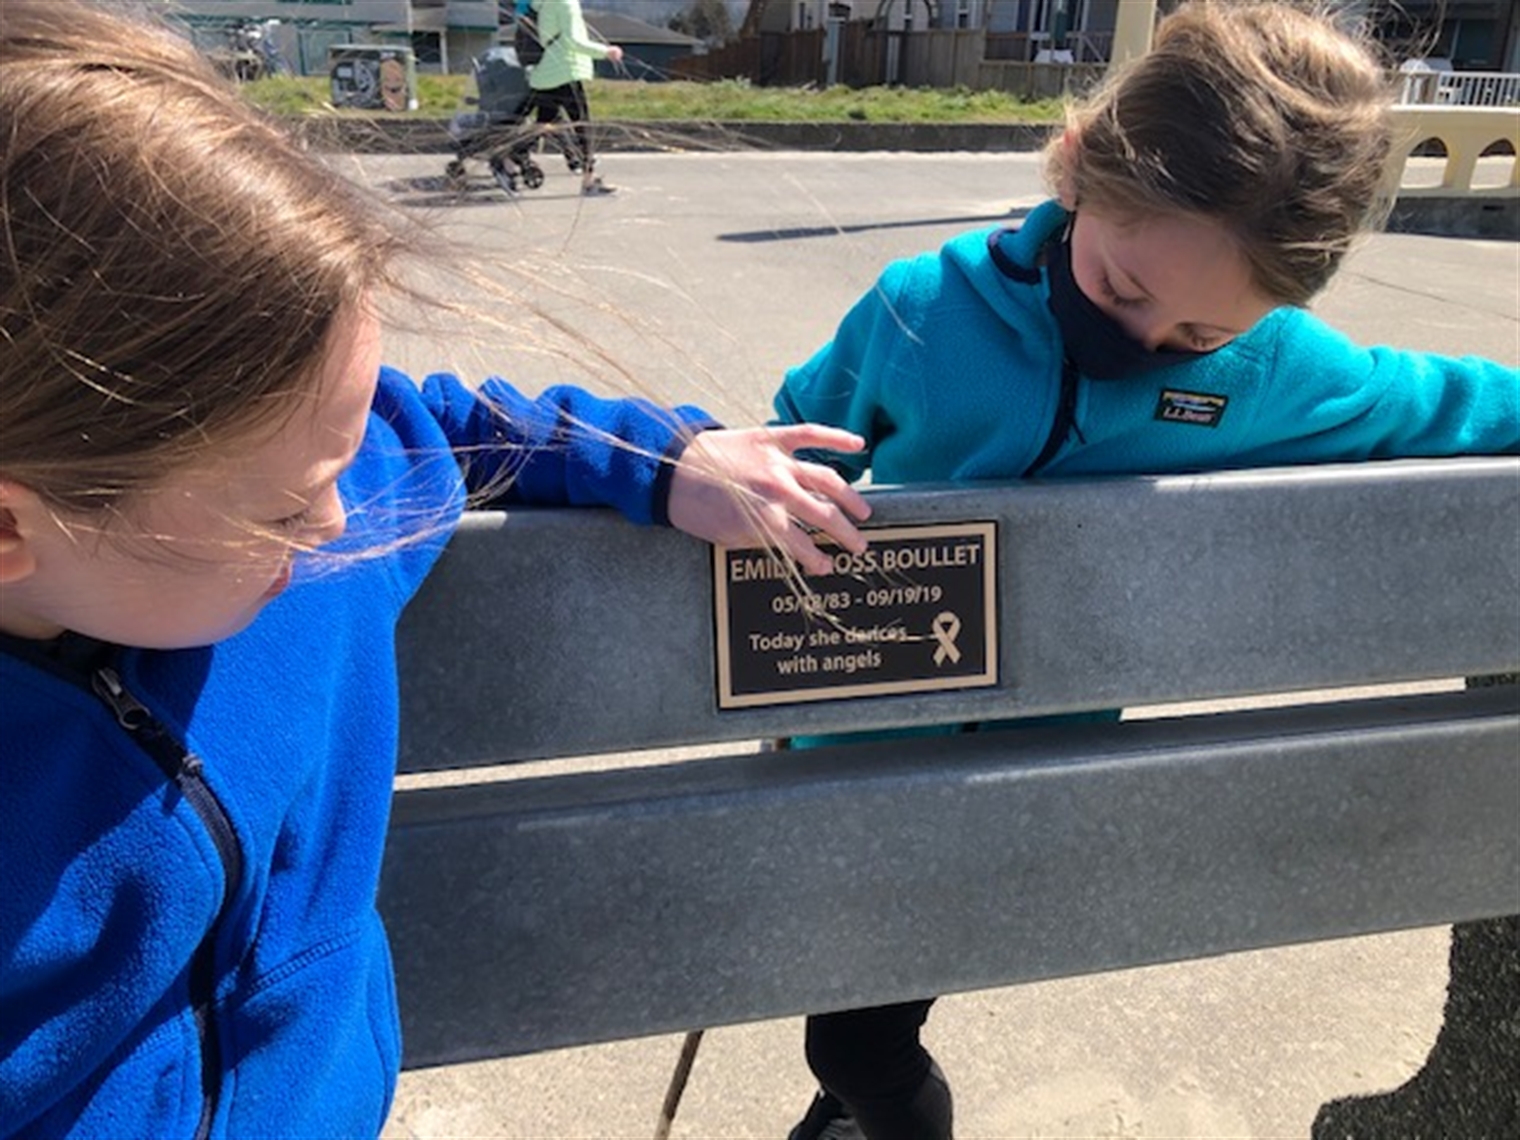 04/10/2021 in Seaside, OR, Ella and Paisley by Emily's memorial plaque.